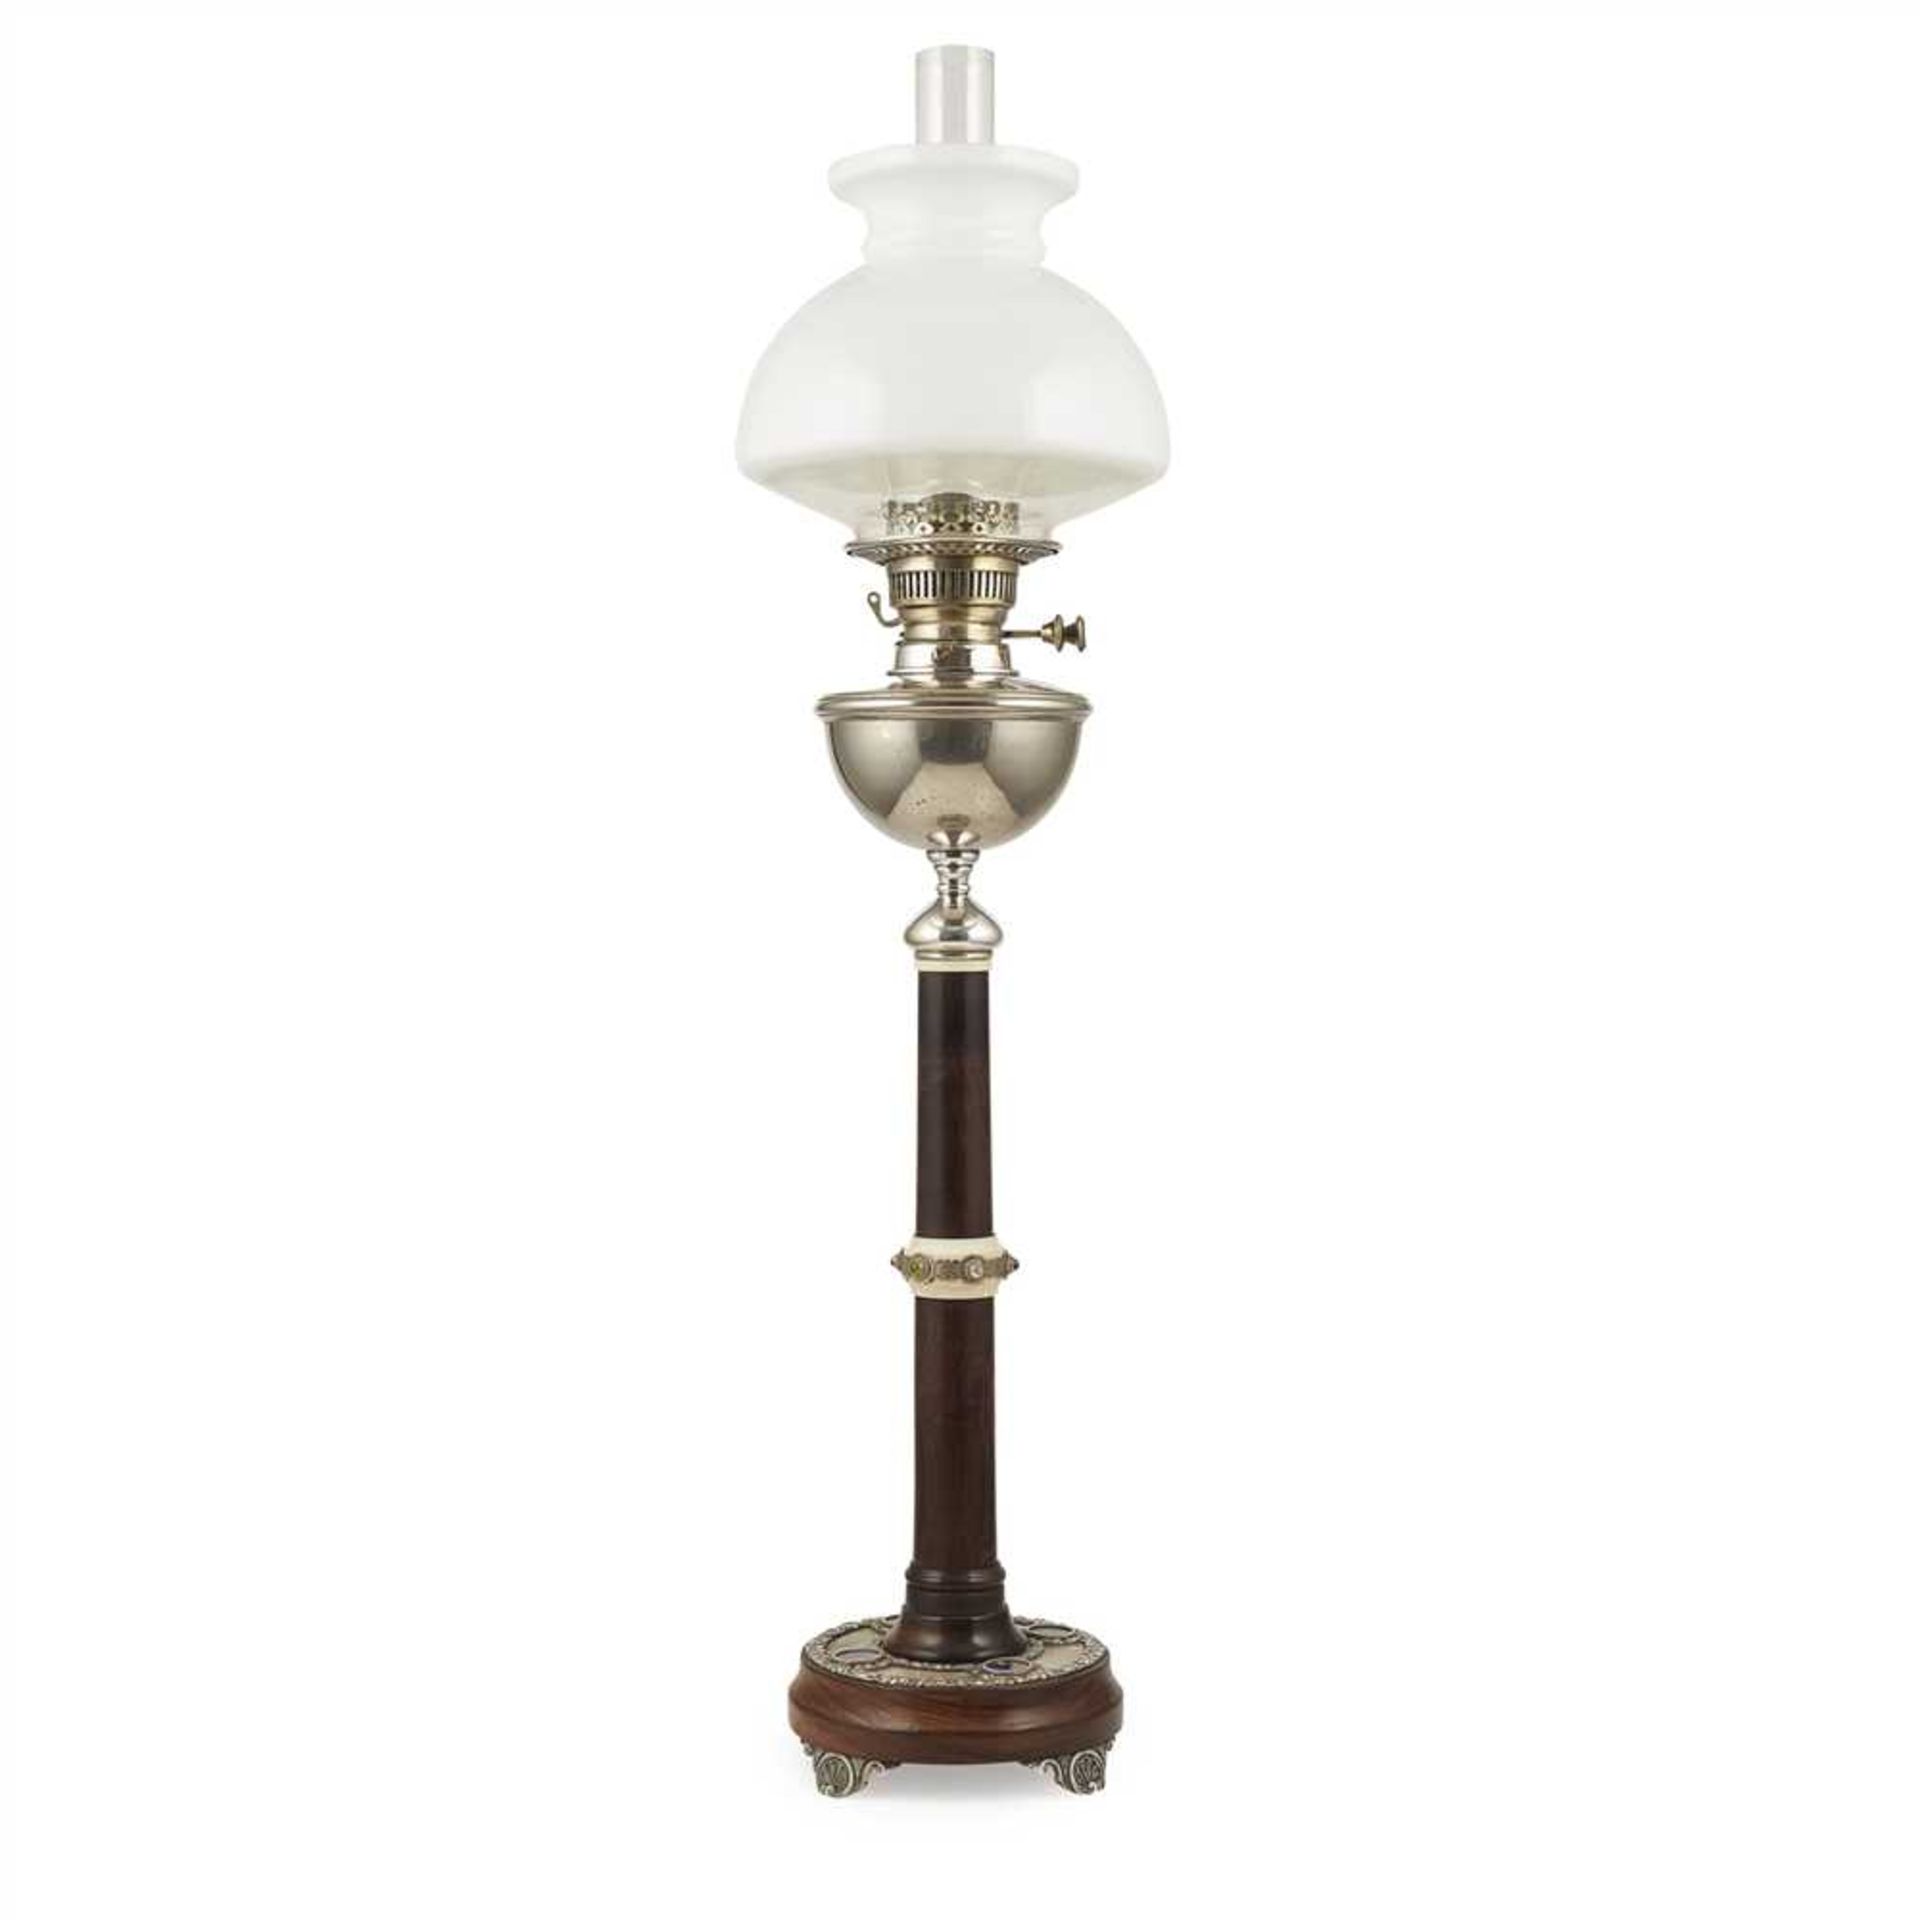 Y ENGLISH SCHOOL ARTS & CRAFTS COROMANDEL, IVORY AND JEWELLED TABLE LAMP, CIRCA 1900 the silvered